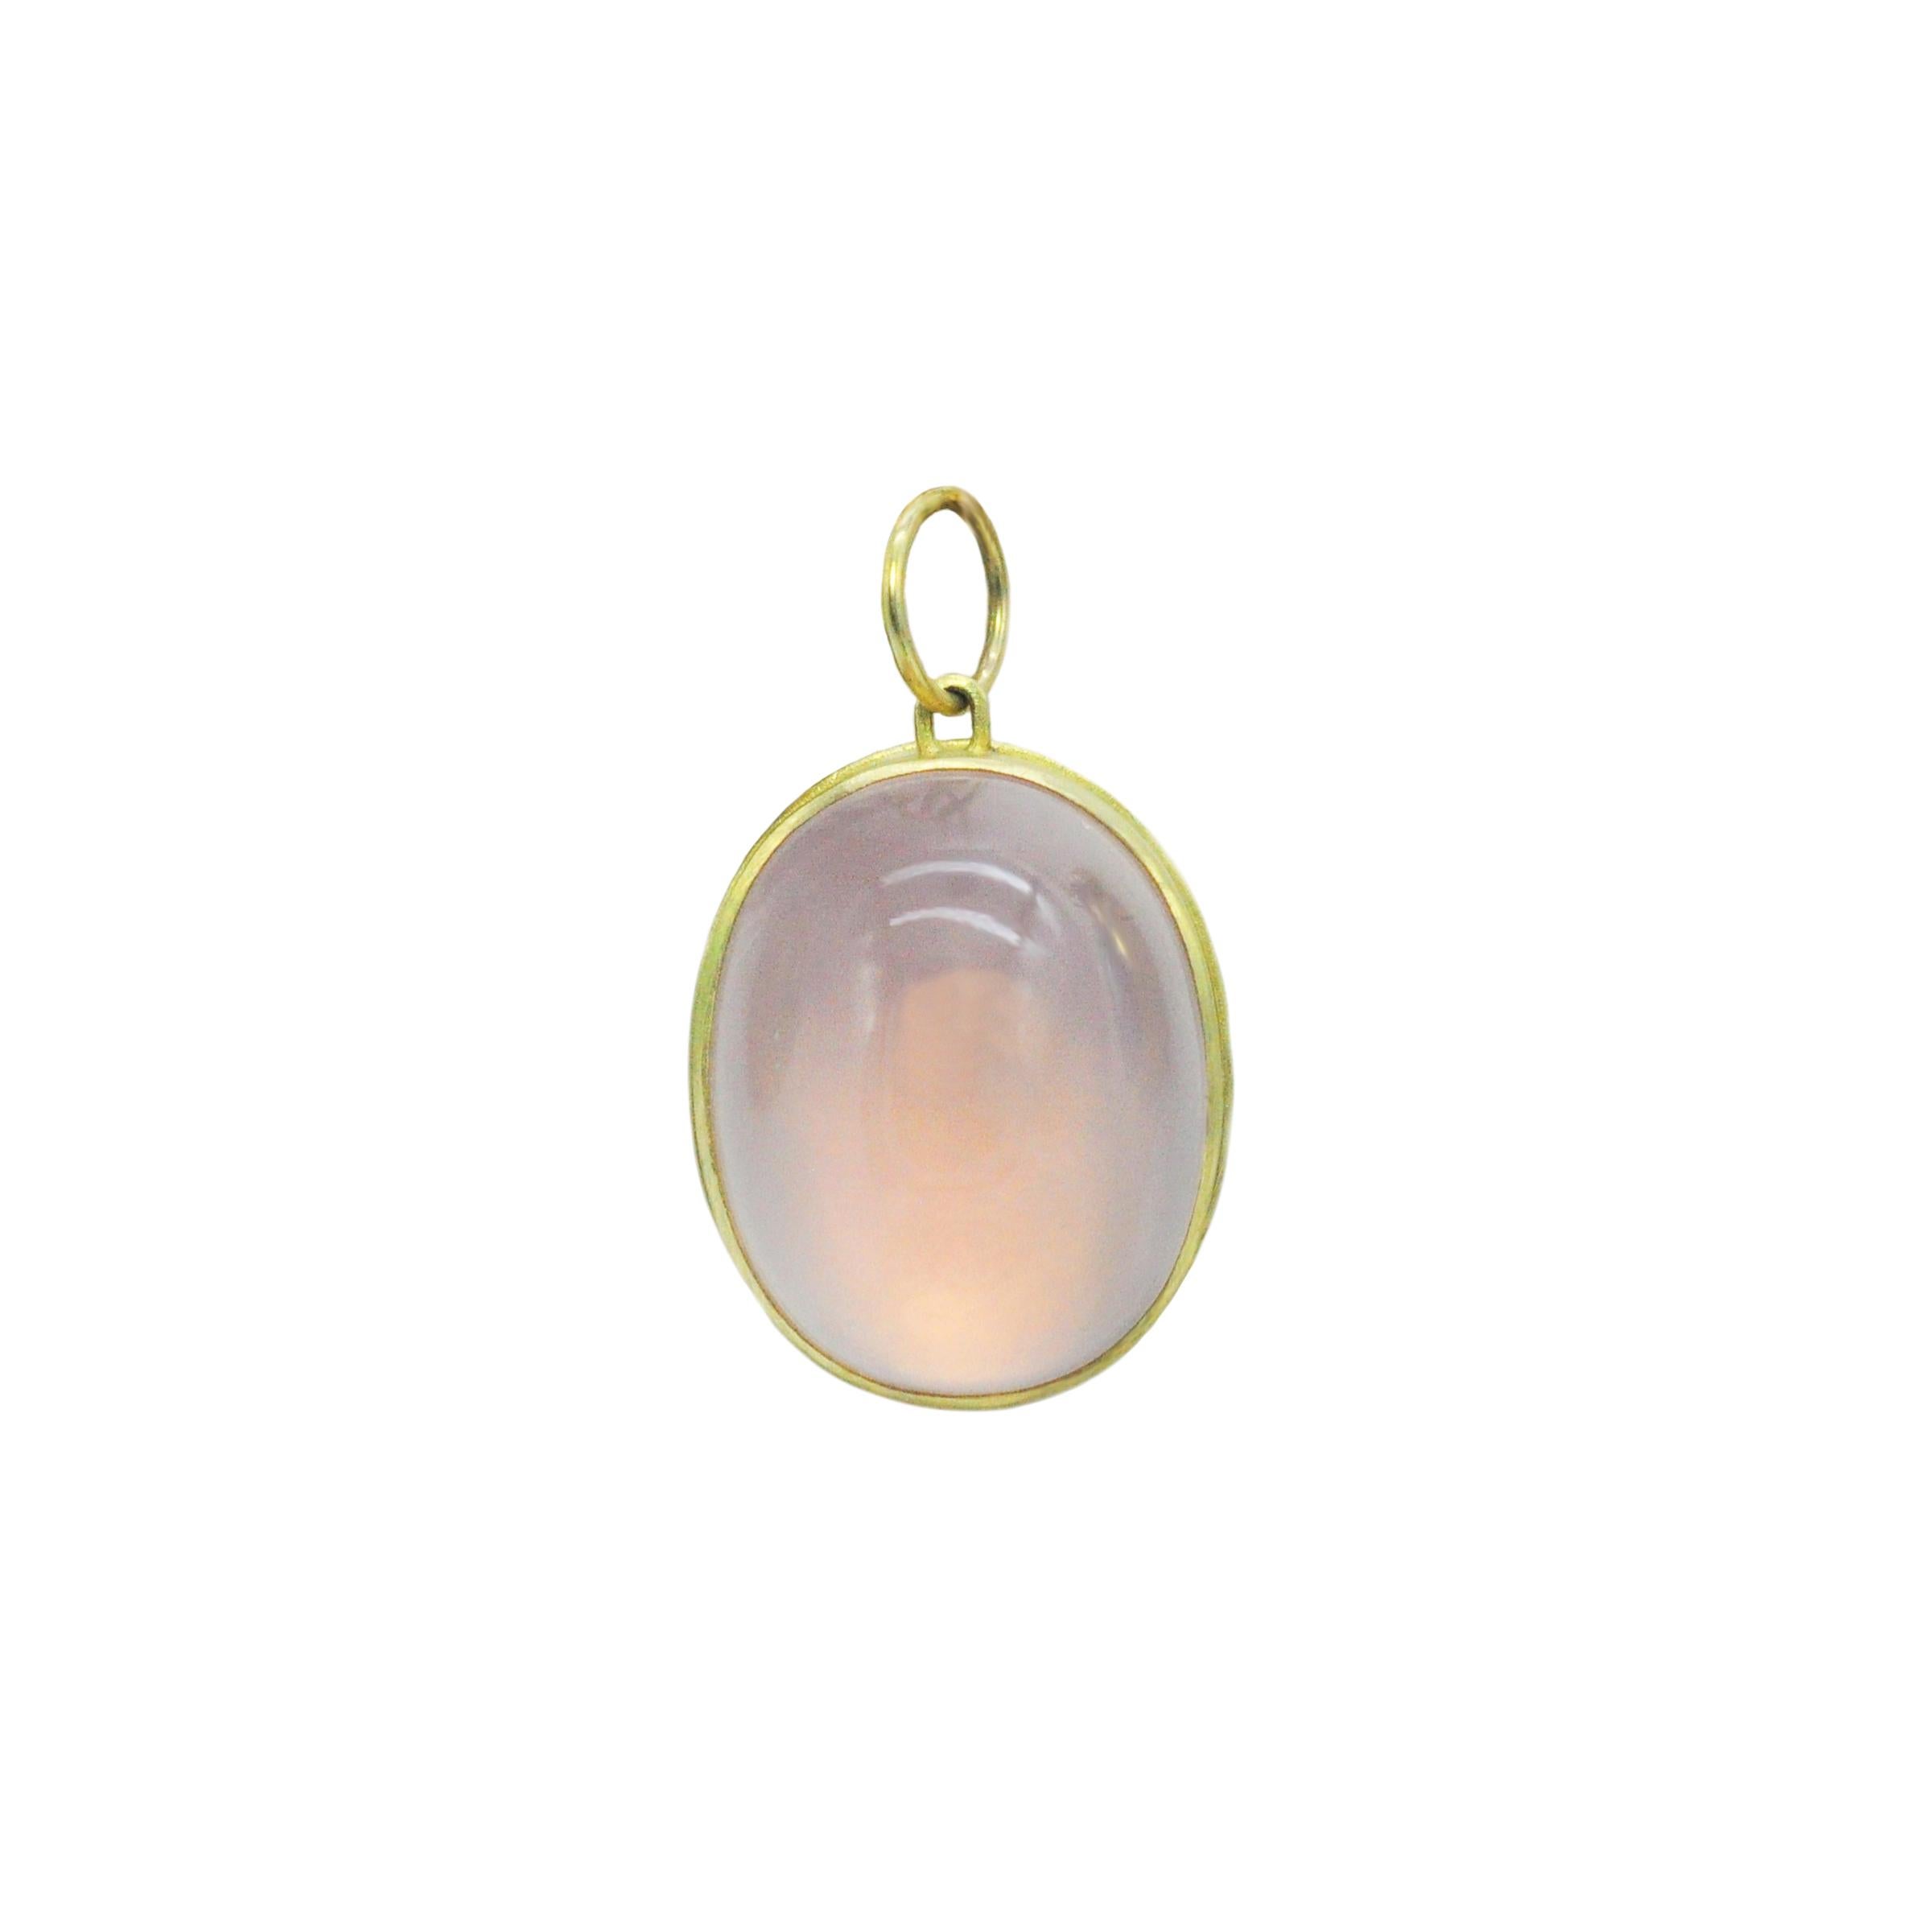 You'll love this colorful charm necklace with designer flair! The botanical gemstone necklace is comprised of a large oval rose quartz pendant set in 18k gold. A star passes over the surface of this soft powder pink beauty. The pendant is paired